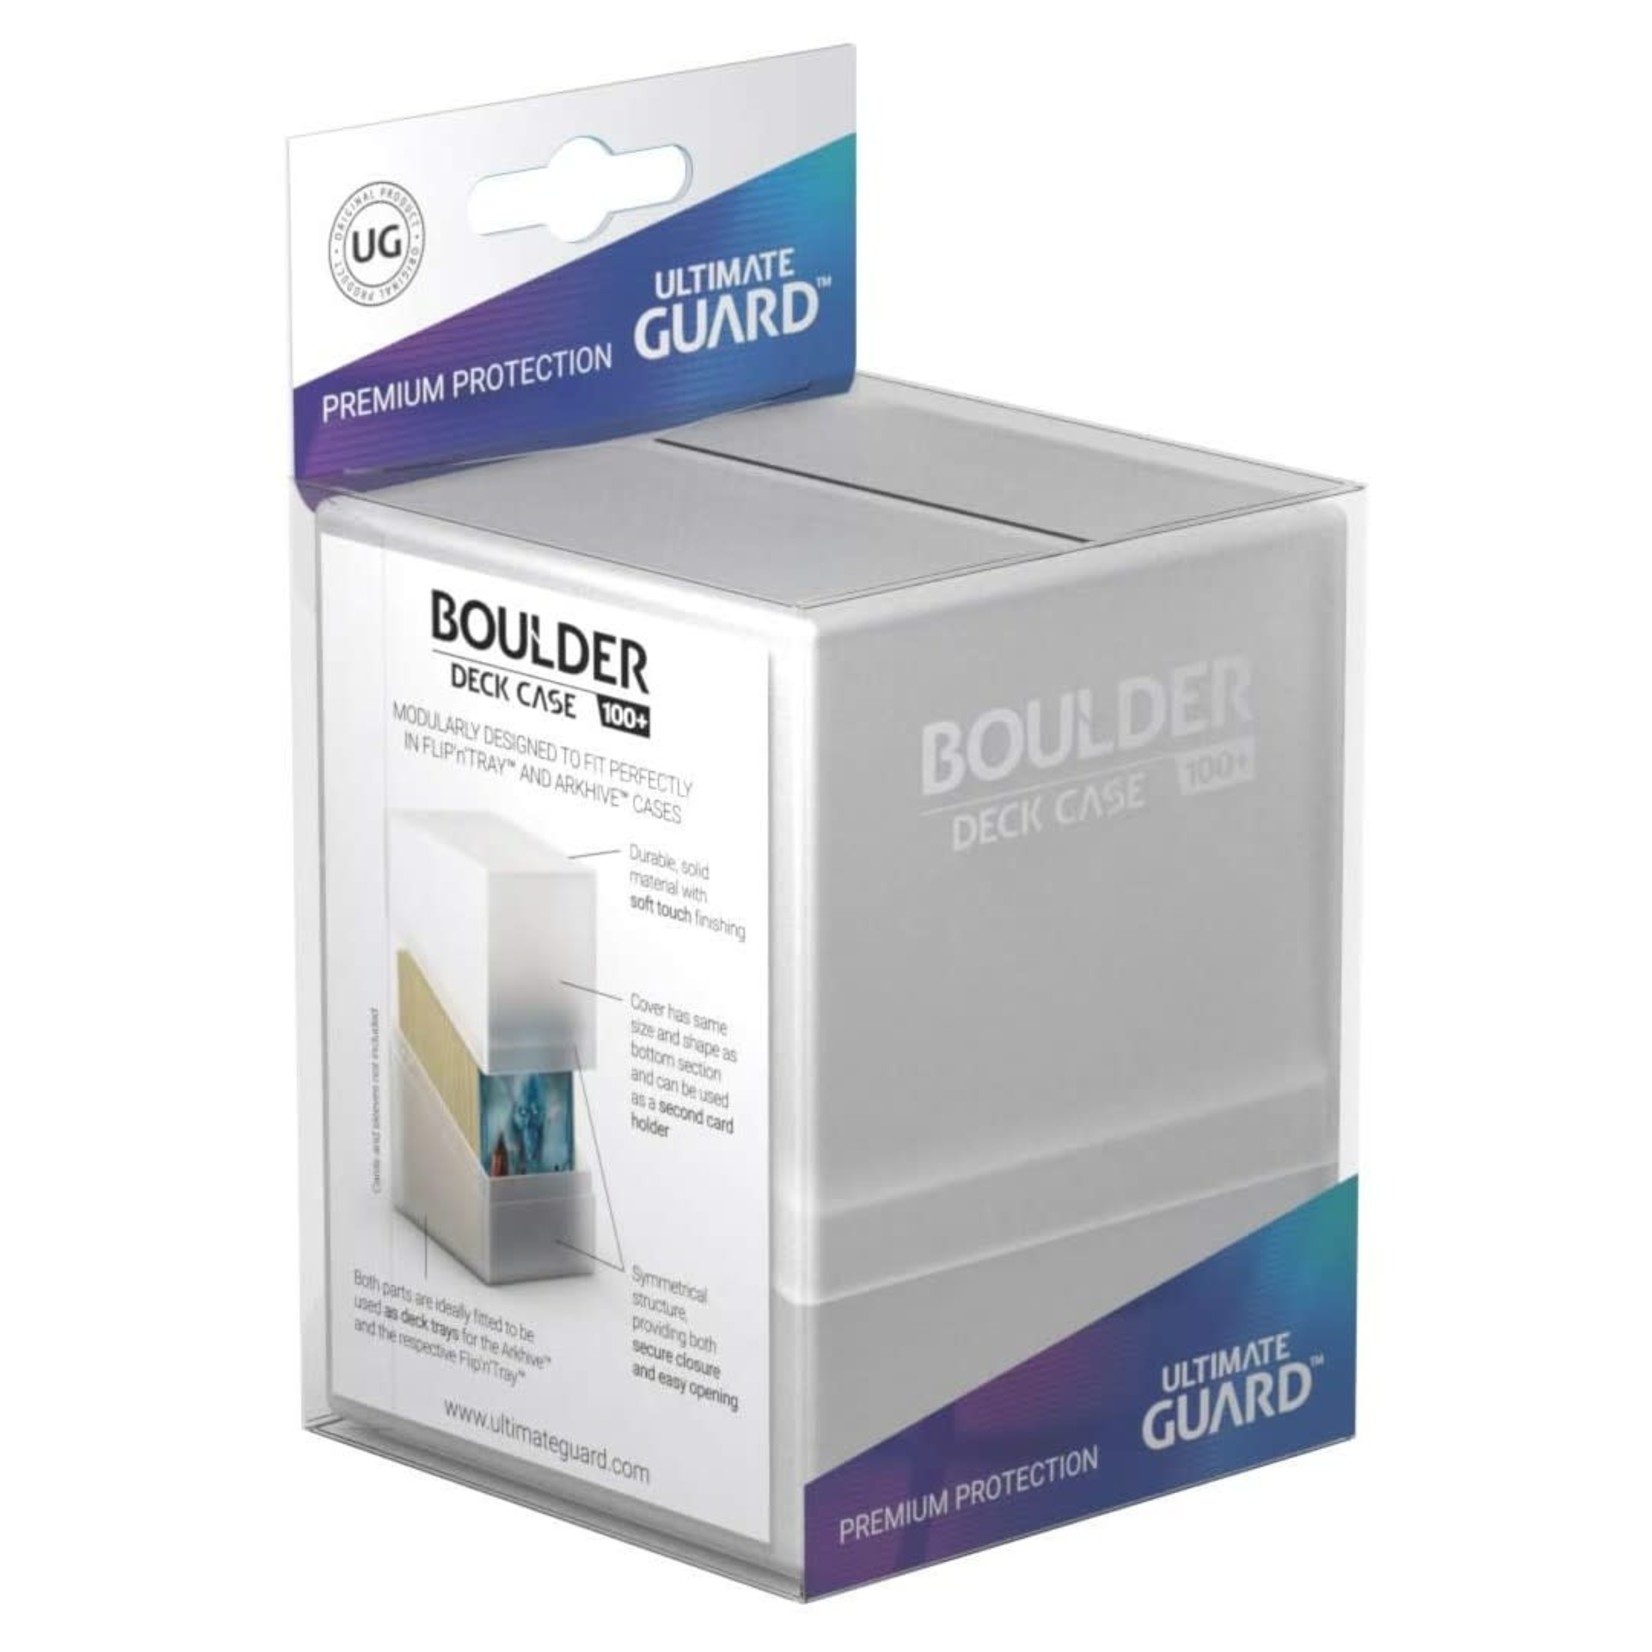 Ultimate Guard Ultimate Guard Boulder Deck Case 100+ Frosted White